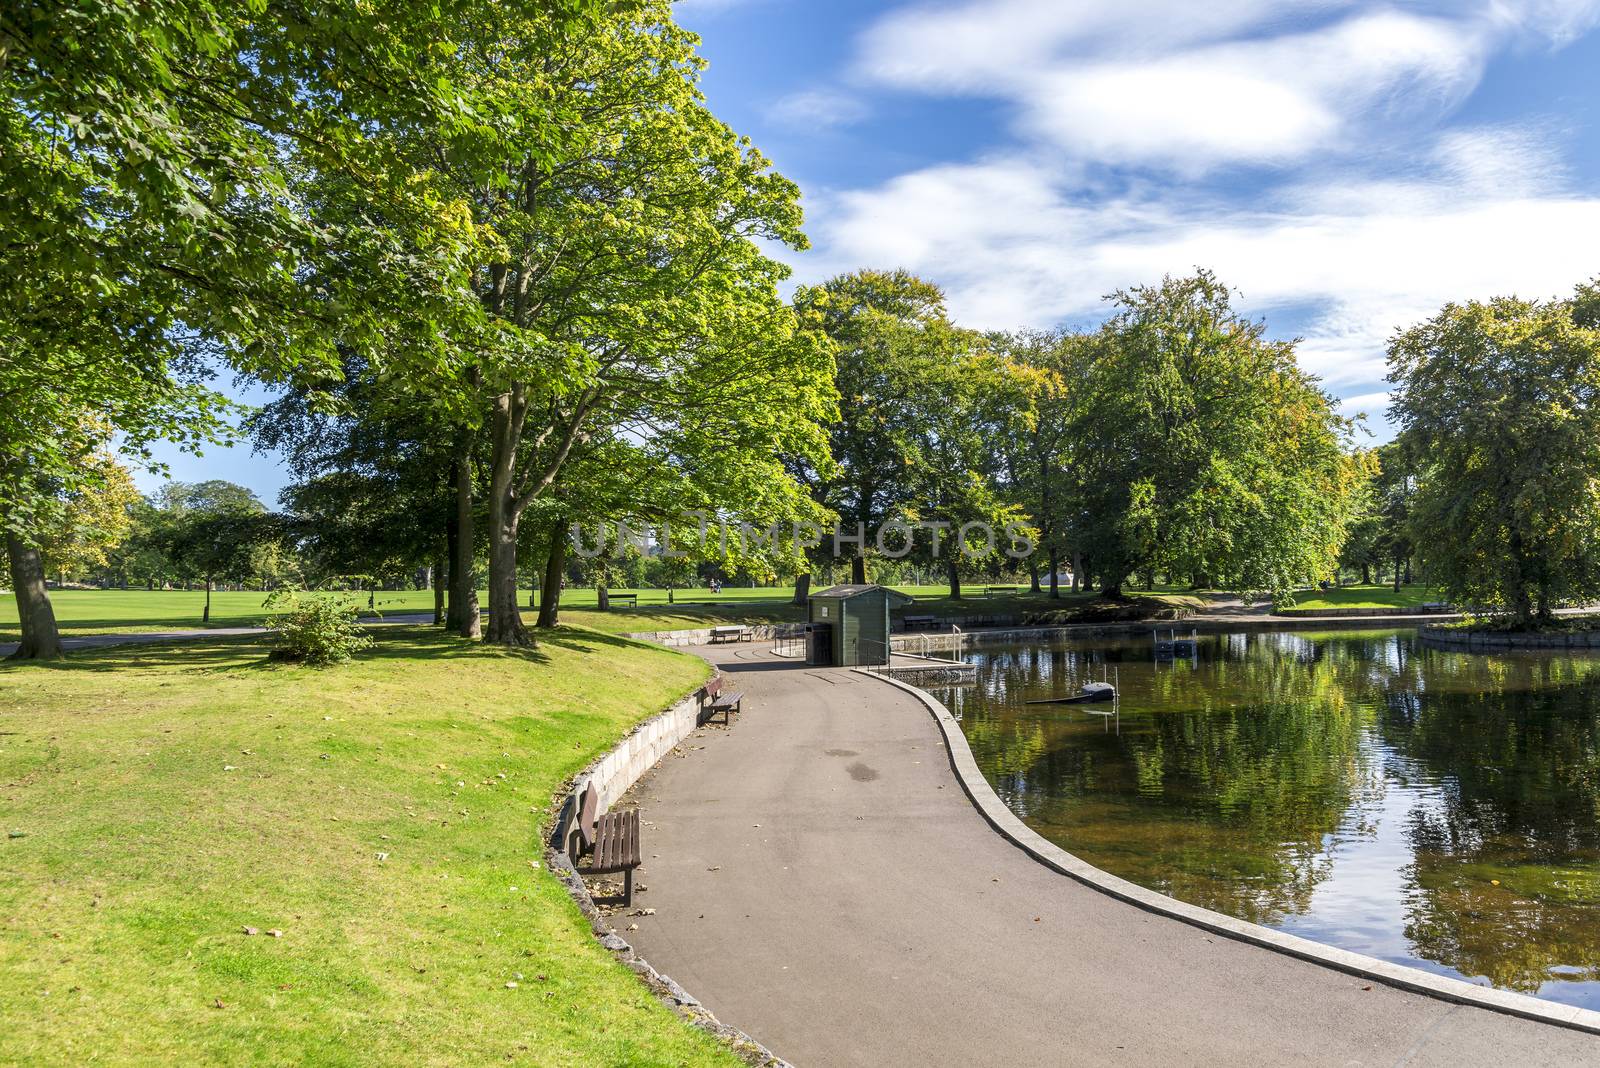 Scenic footpath with benches around a small shallow pond in Duthie park, Aberdeen, Scotland by anastasstyles